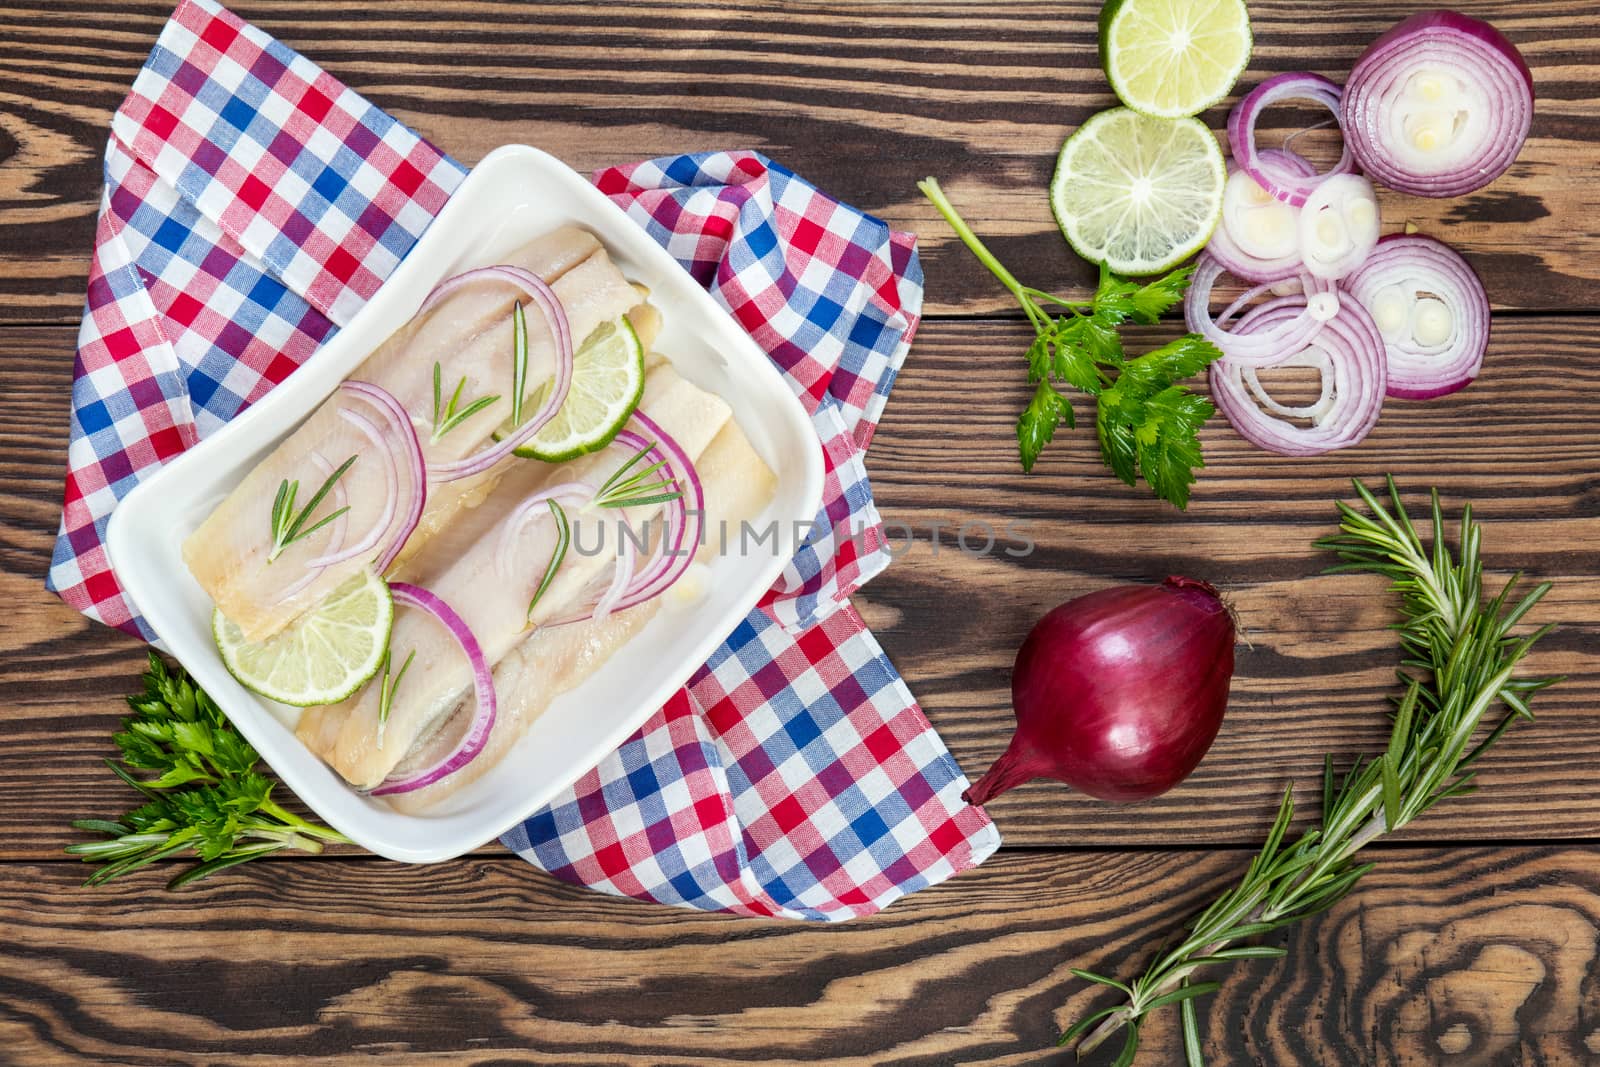 Sliced herring fillets, cut onion and lime on white plate. Checkered napkin. On wooden table.